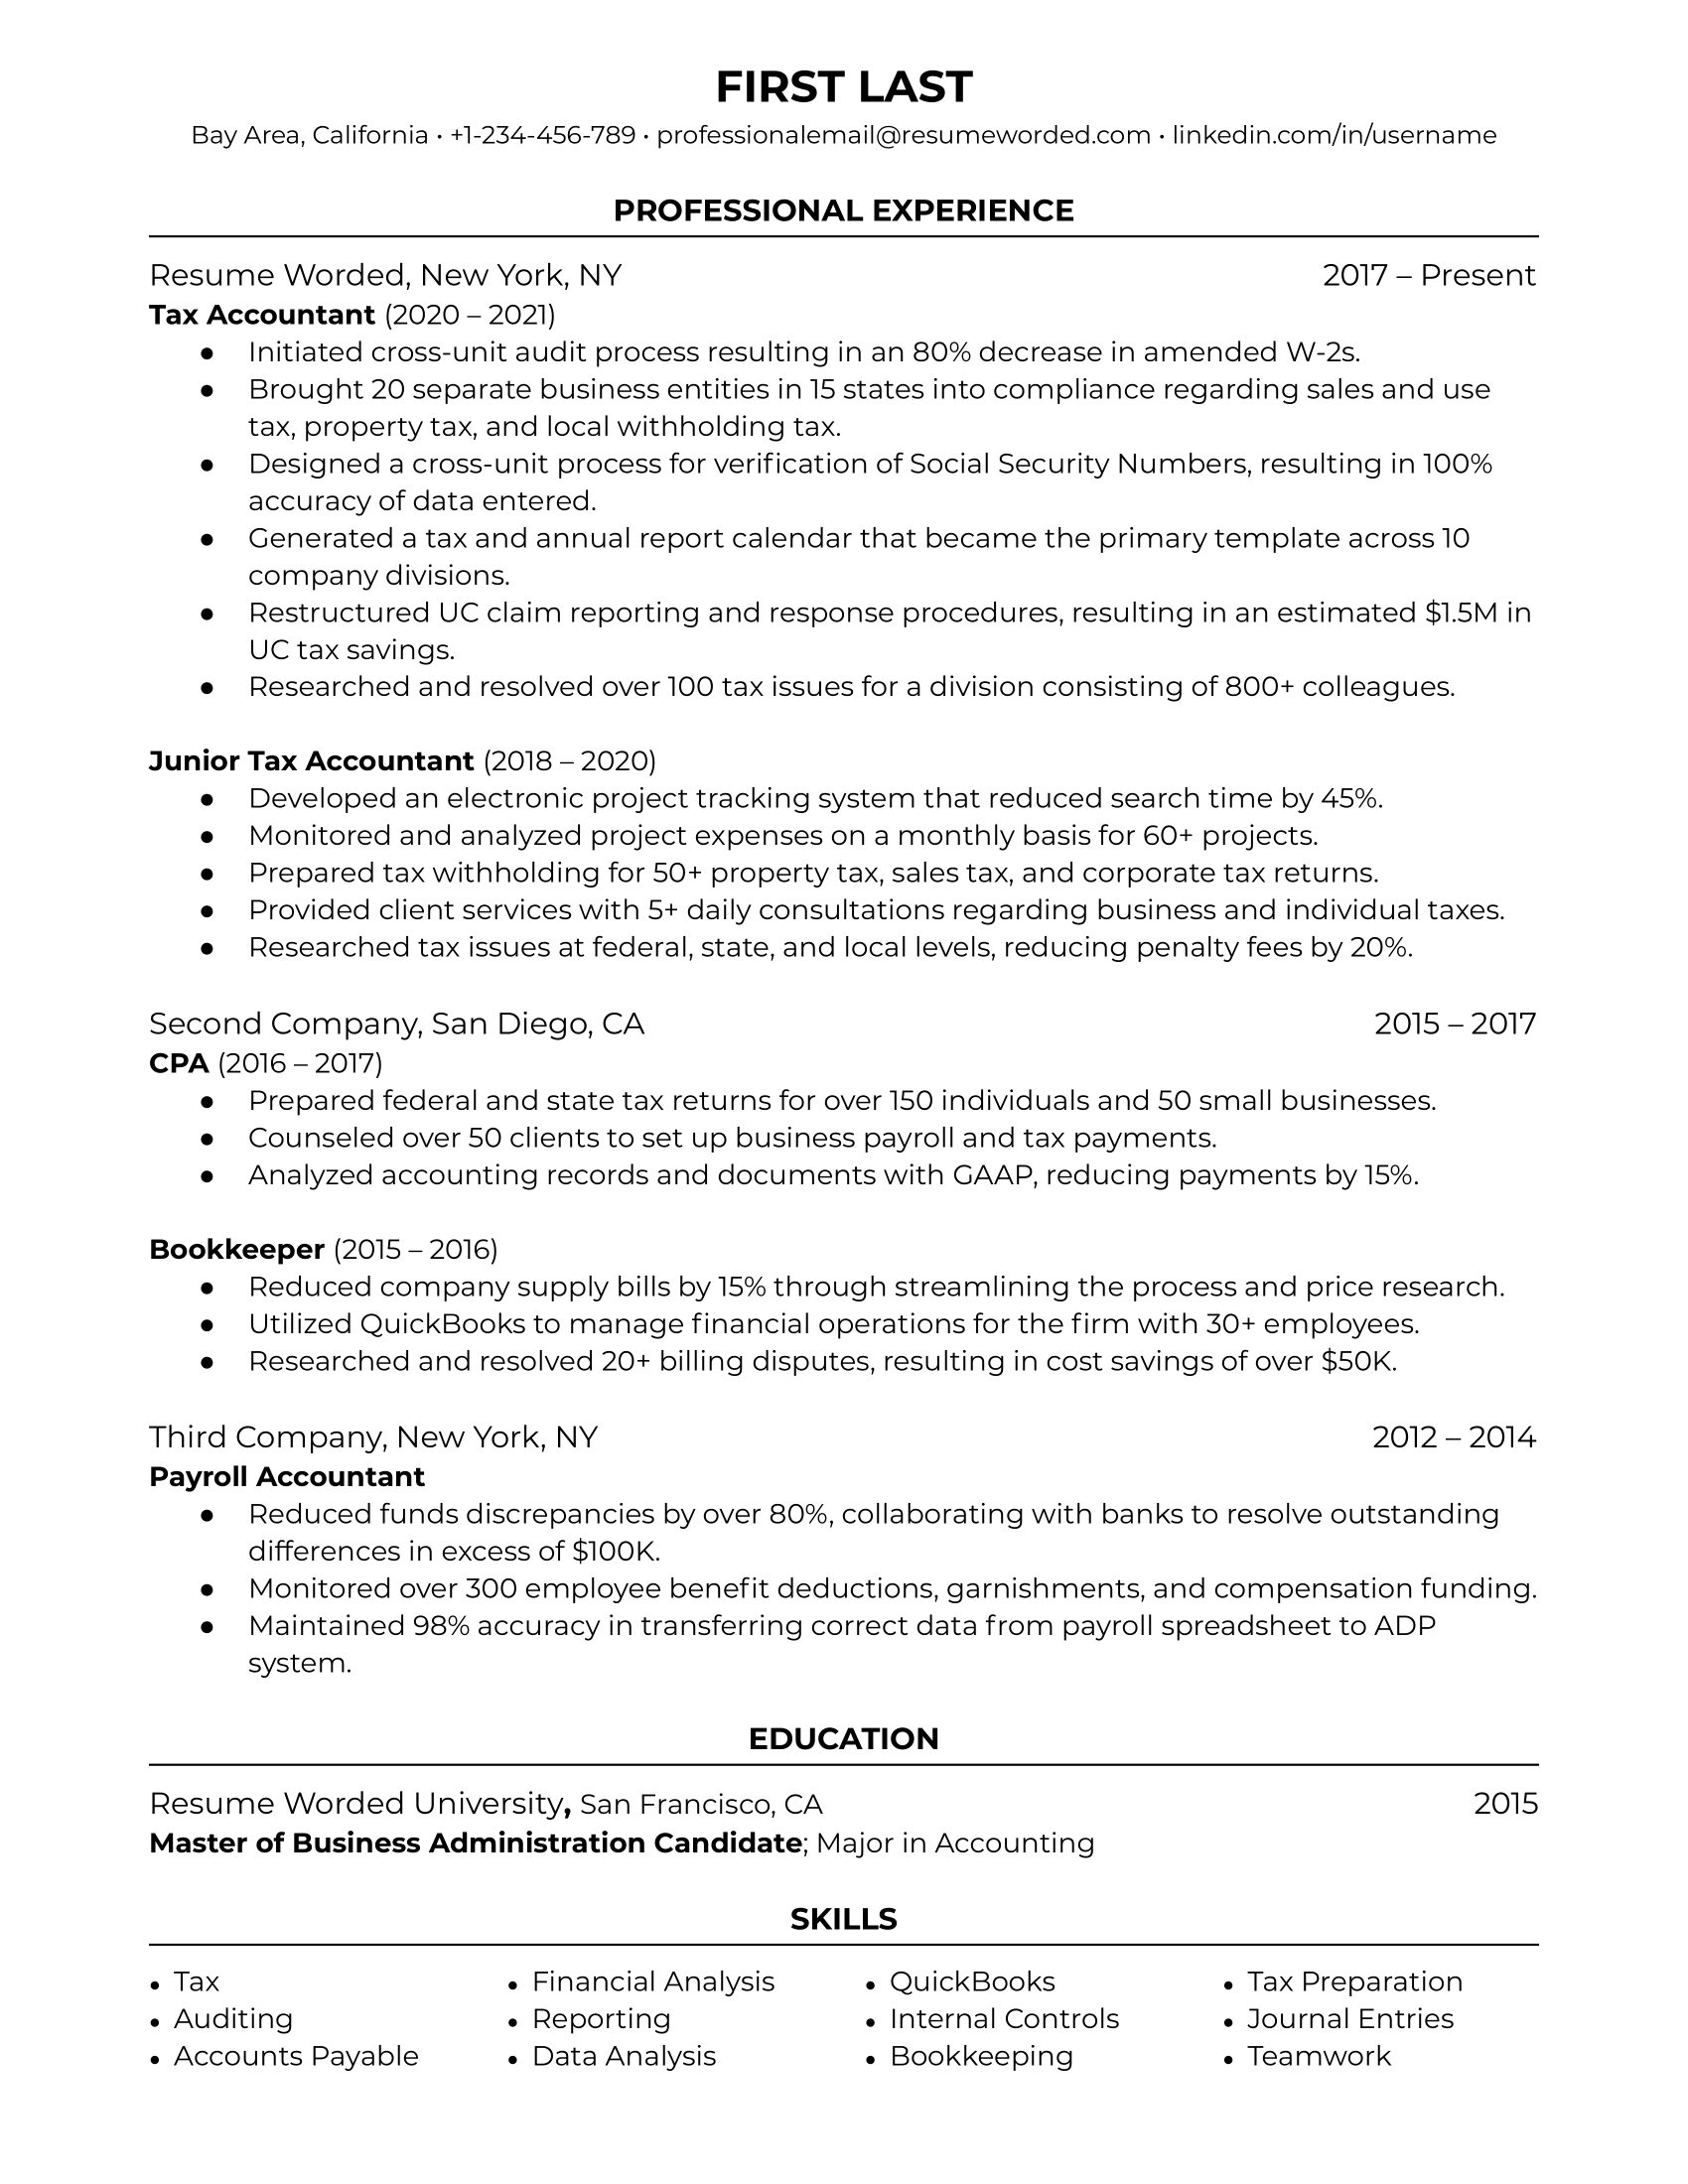 Tax accountant resume with hard skills section and specific achievements with numbers
